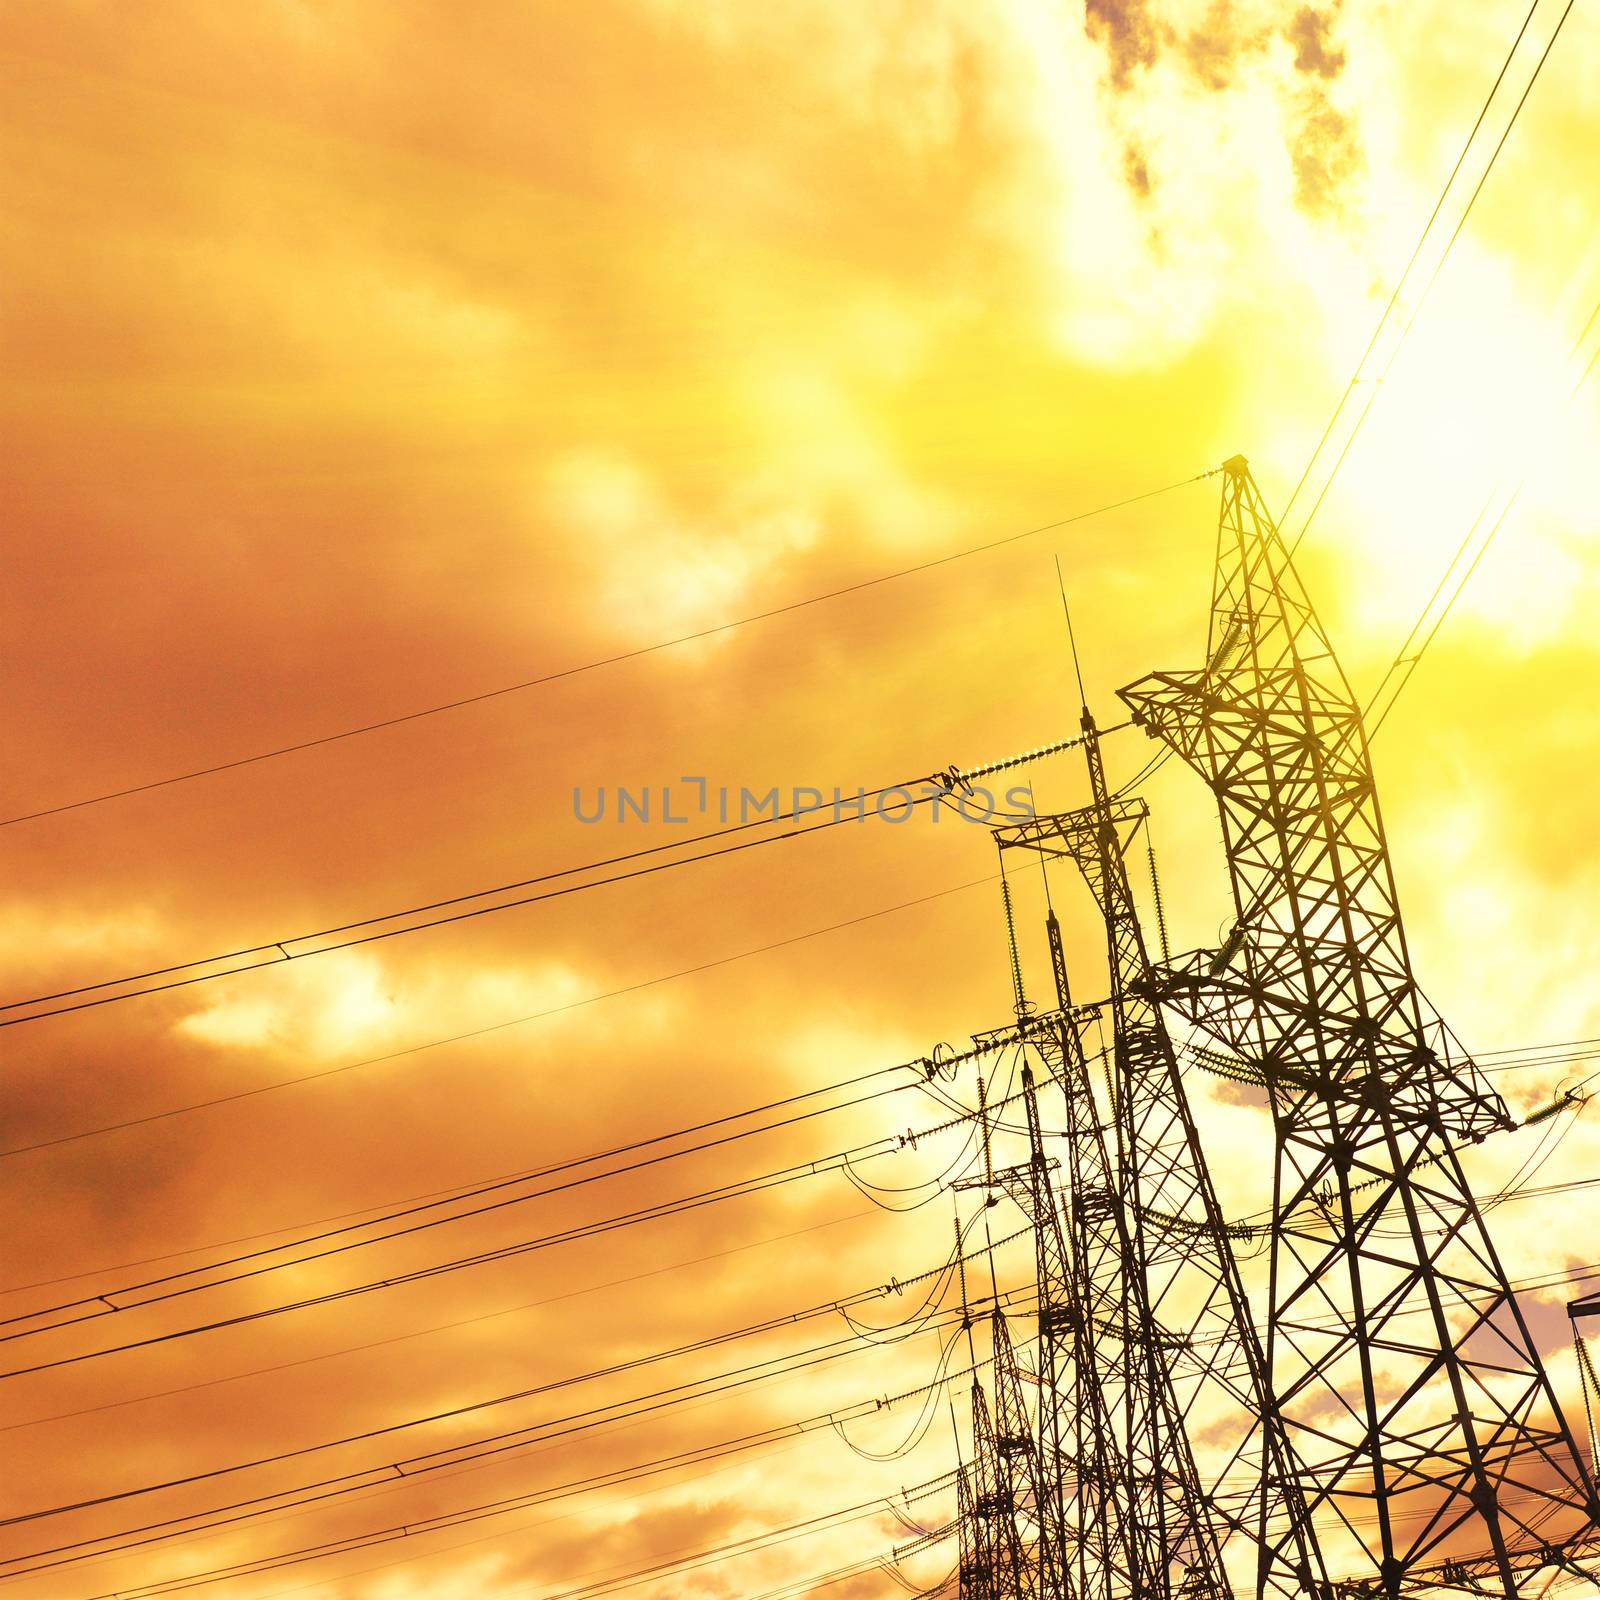 lines of electricity transfers an evening landscape by jordano